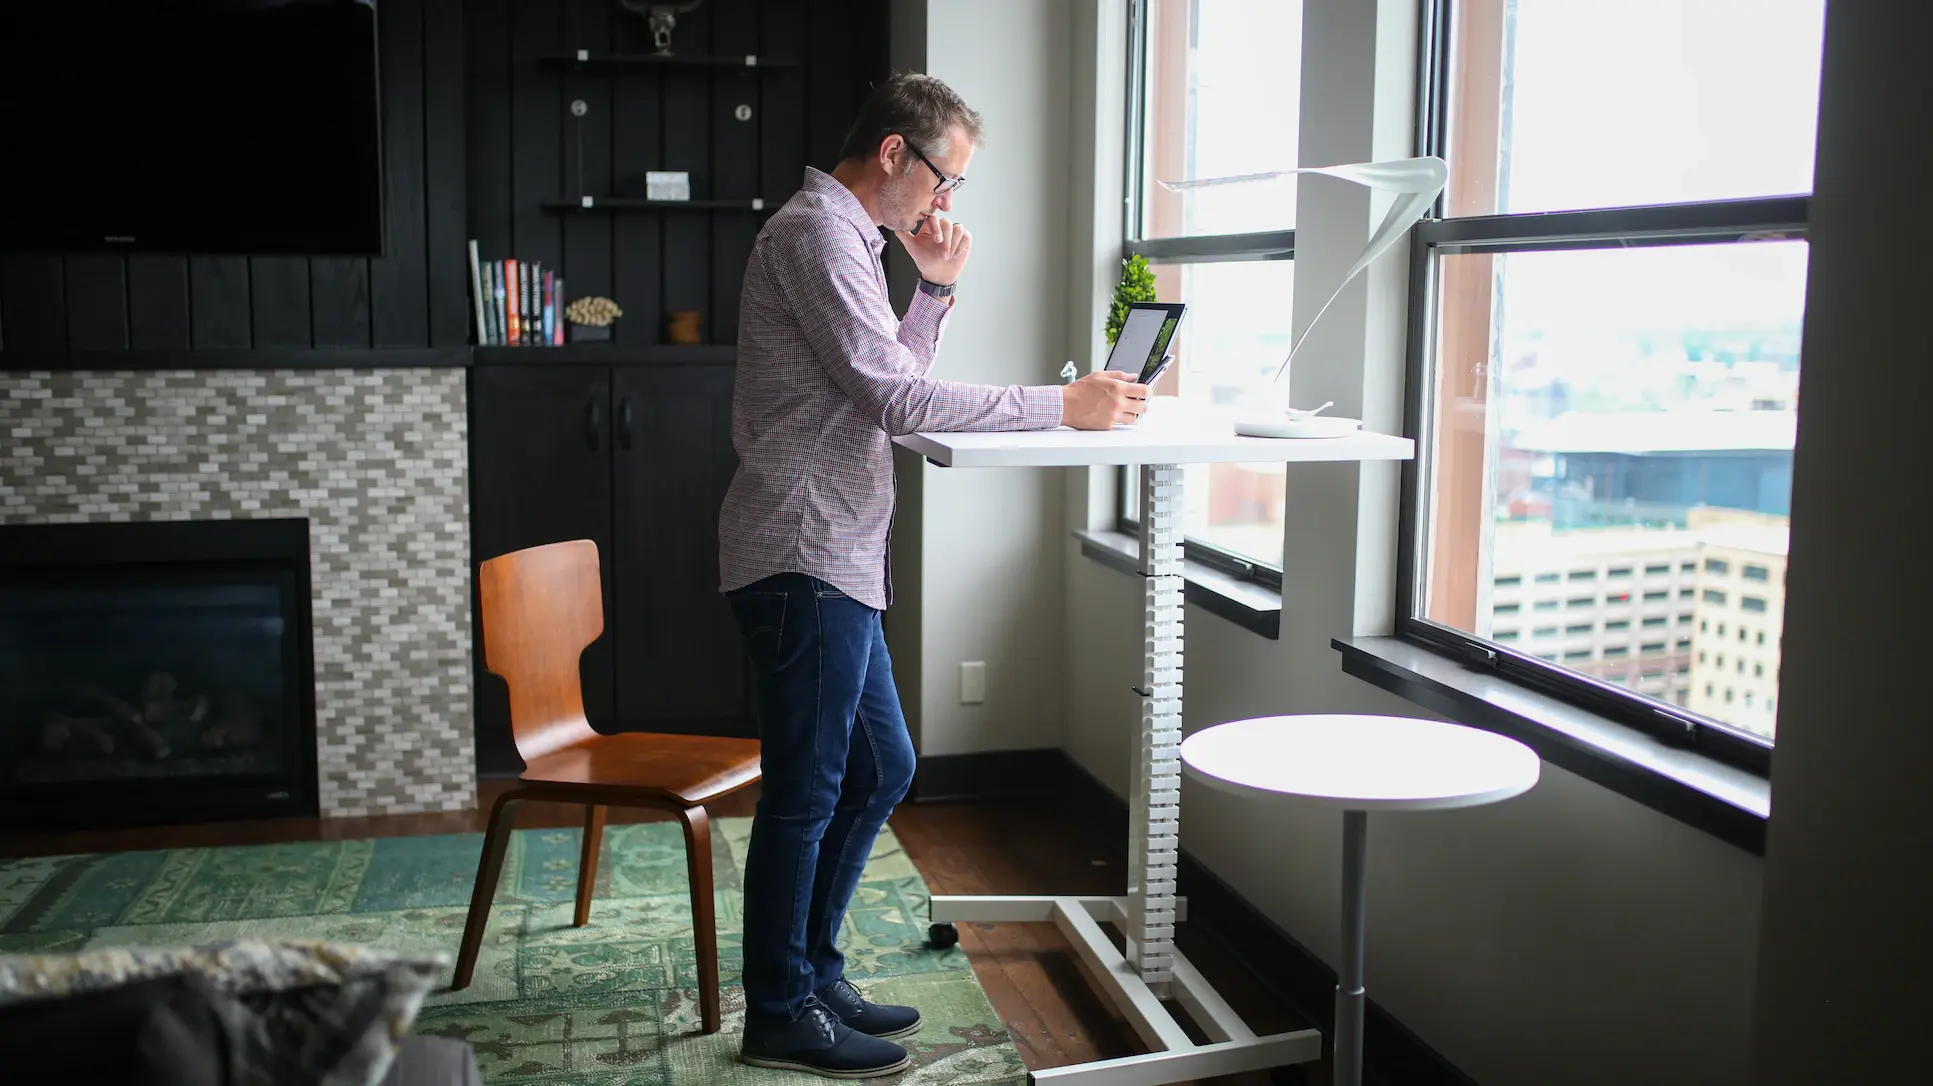 7 Must-Have Work-From-Home Gadgets for Remote Workers